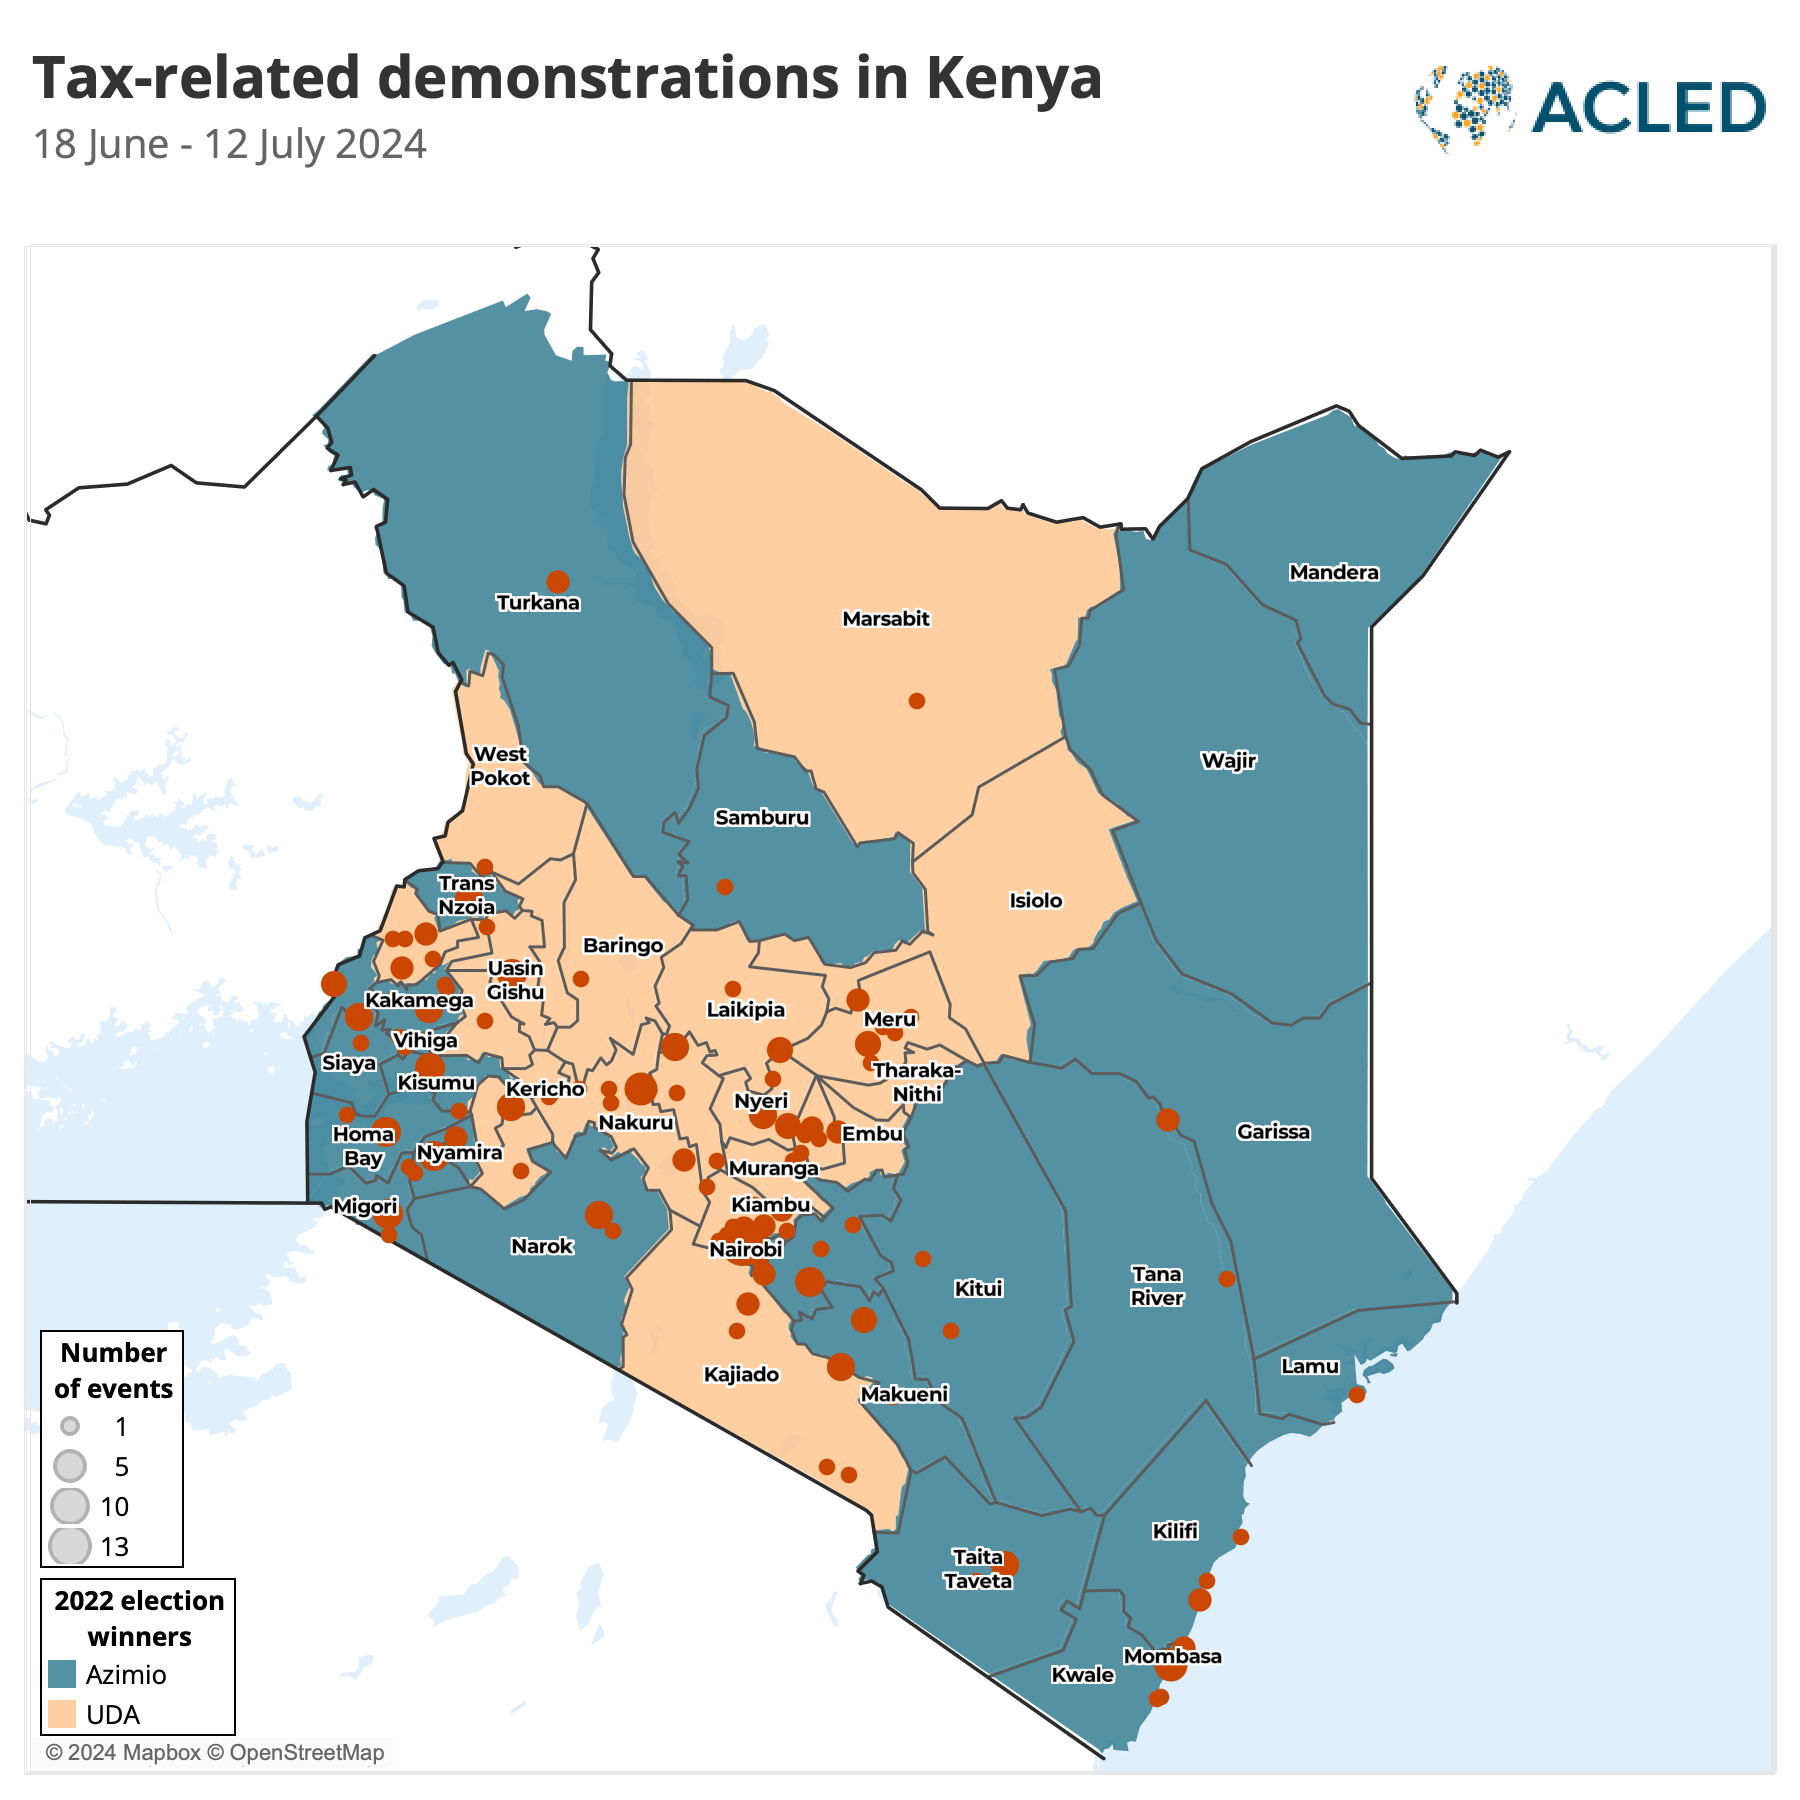 Map - Tax related demonstrations in Kenya - June to July 2024